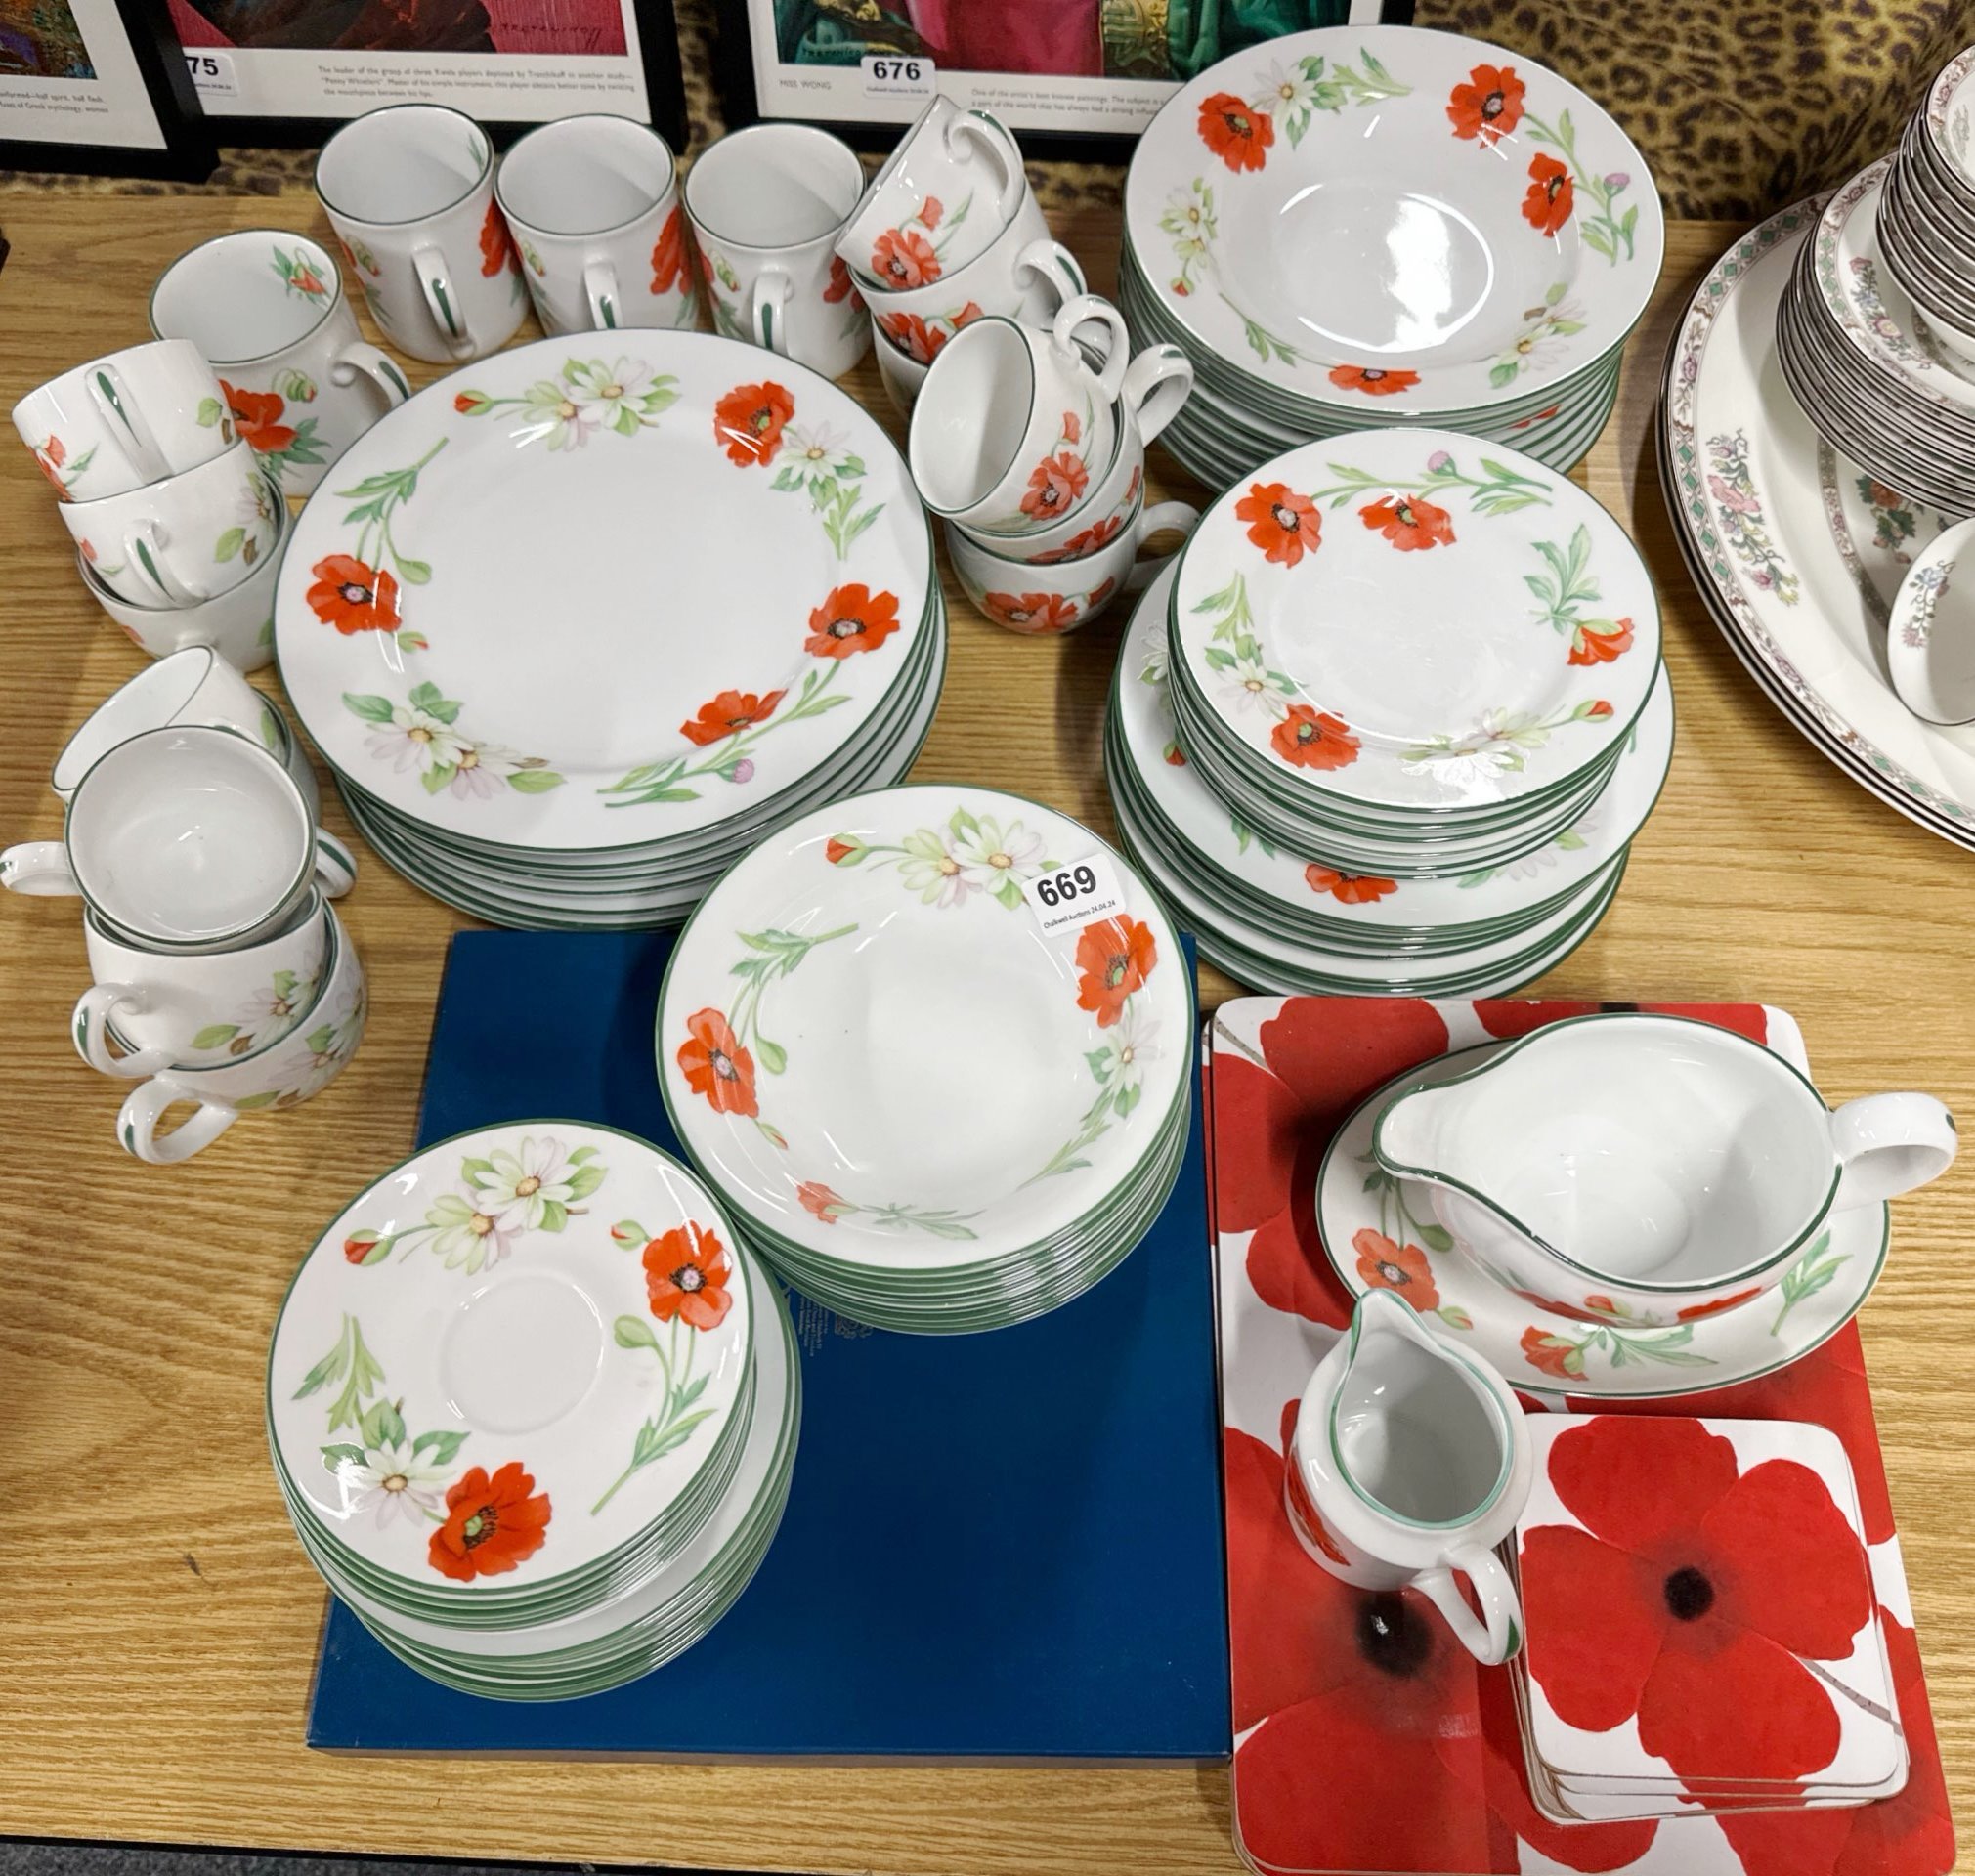 A very extensive Royal Doulton Poppy's pattern dinner, tea and coffee set.